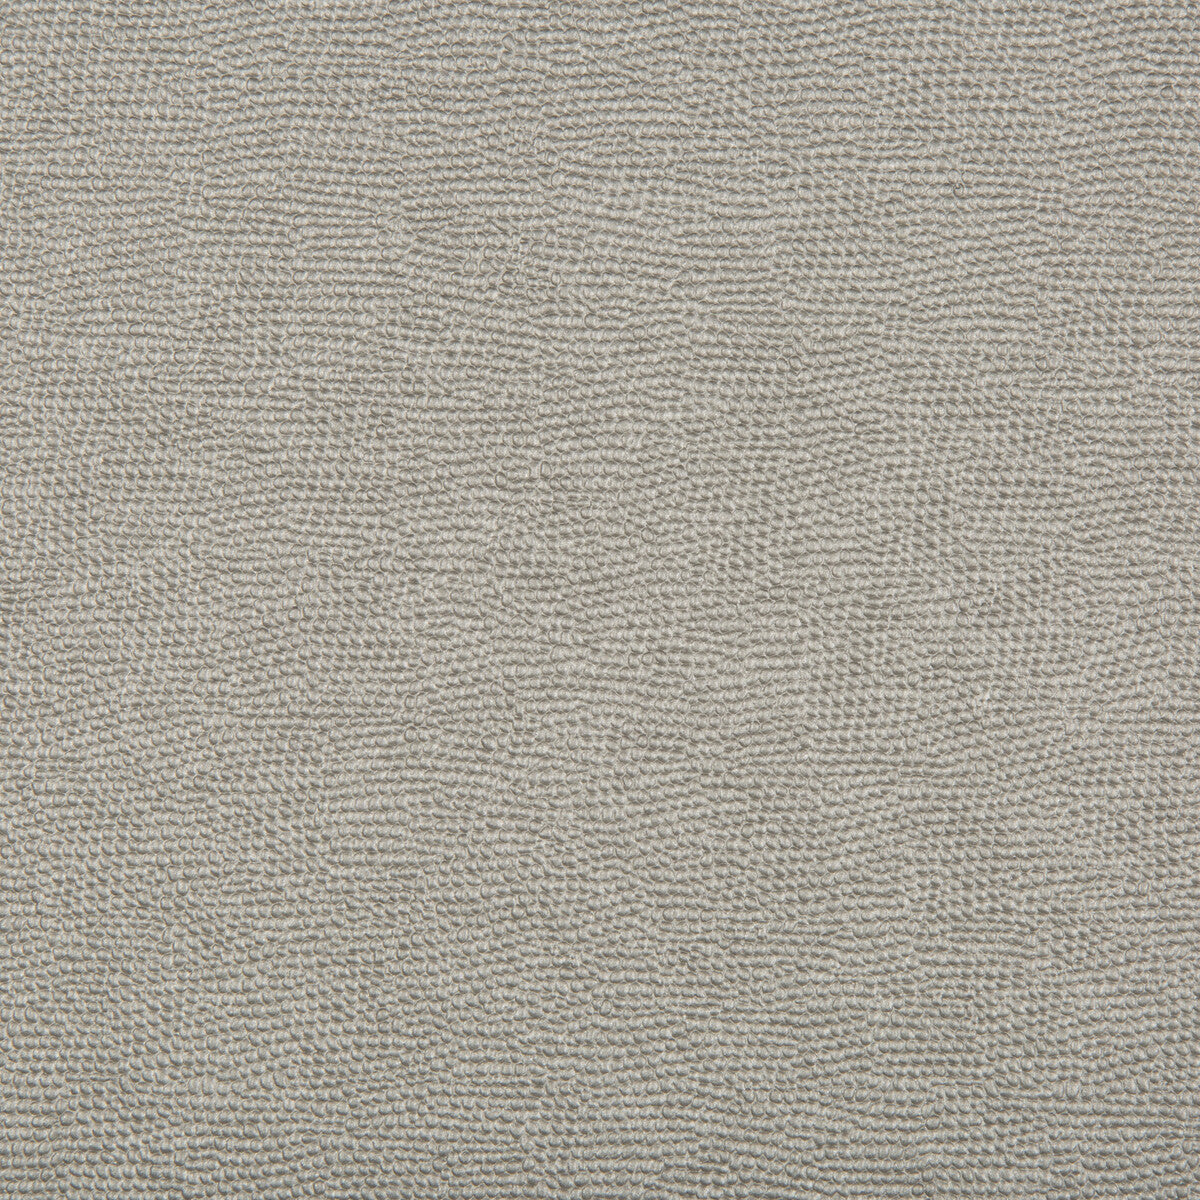 Spartan fabric in pewter color - pattern SPARTAN.11.0 - by Kravet Contract in the Faux Leather Extreme Performance collection